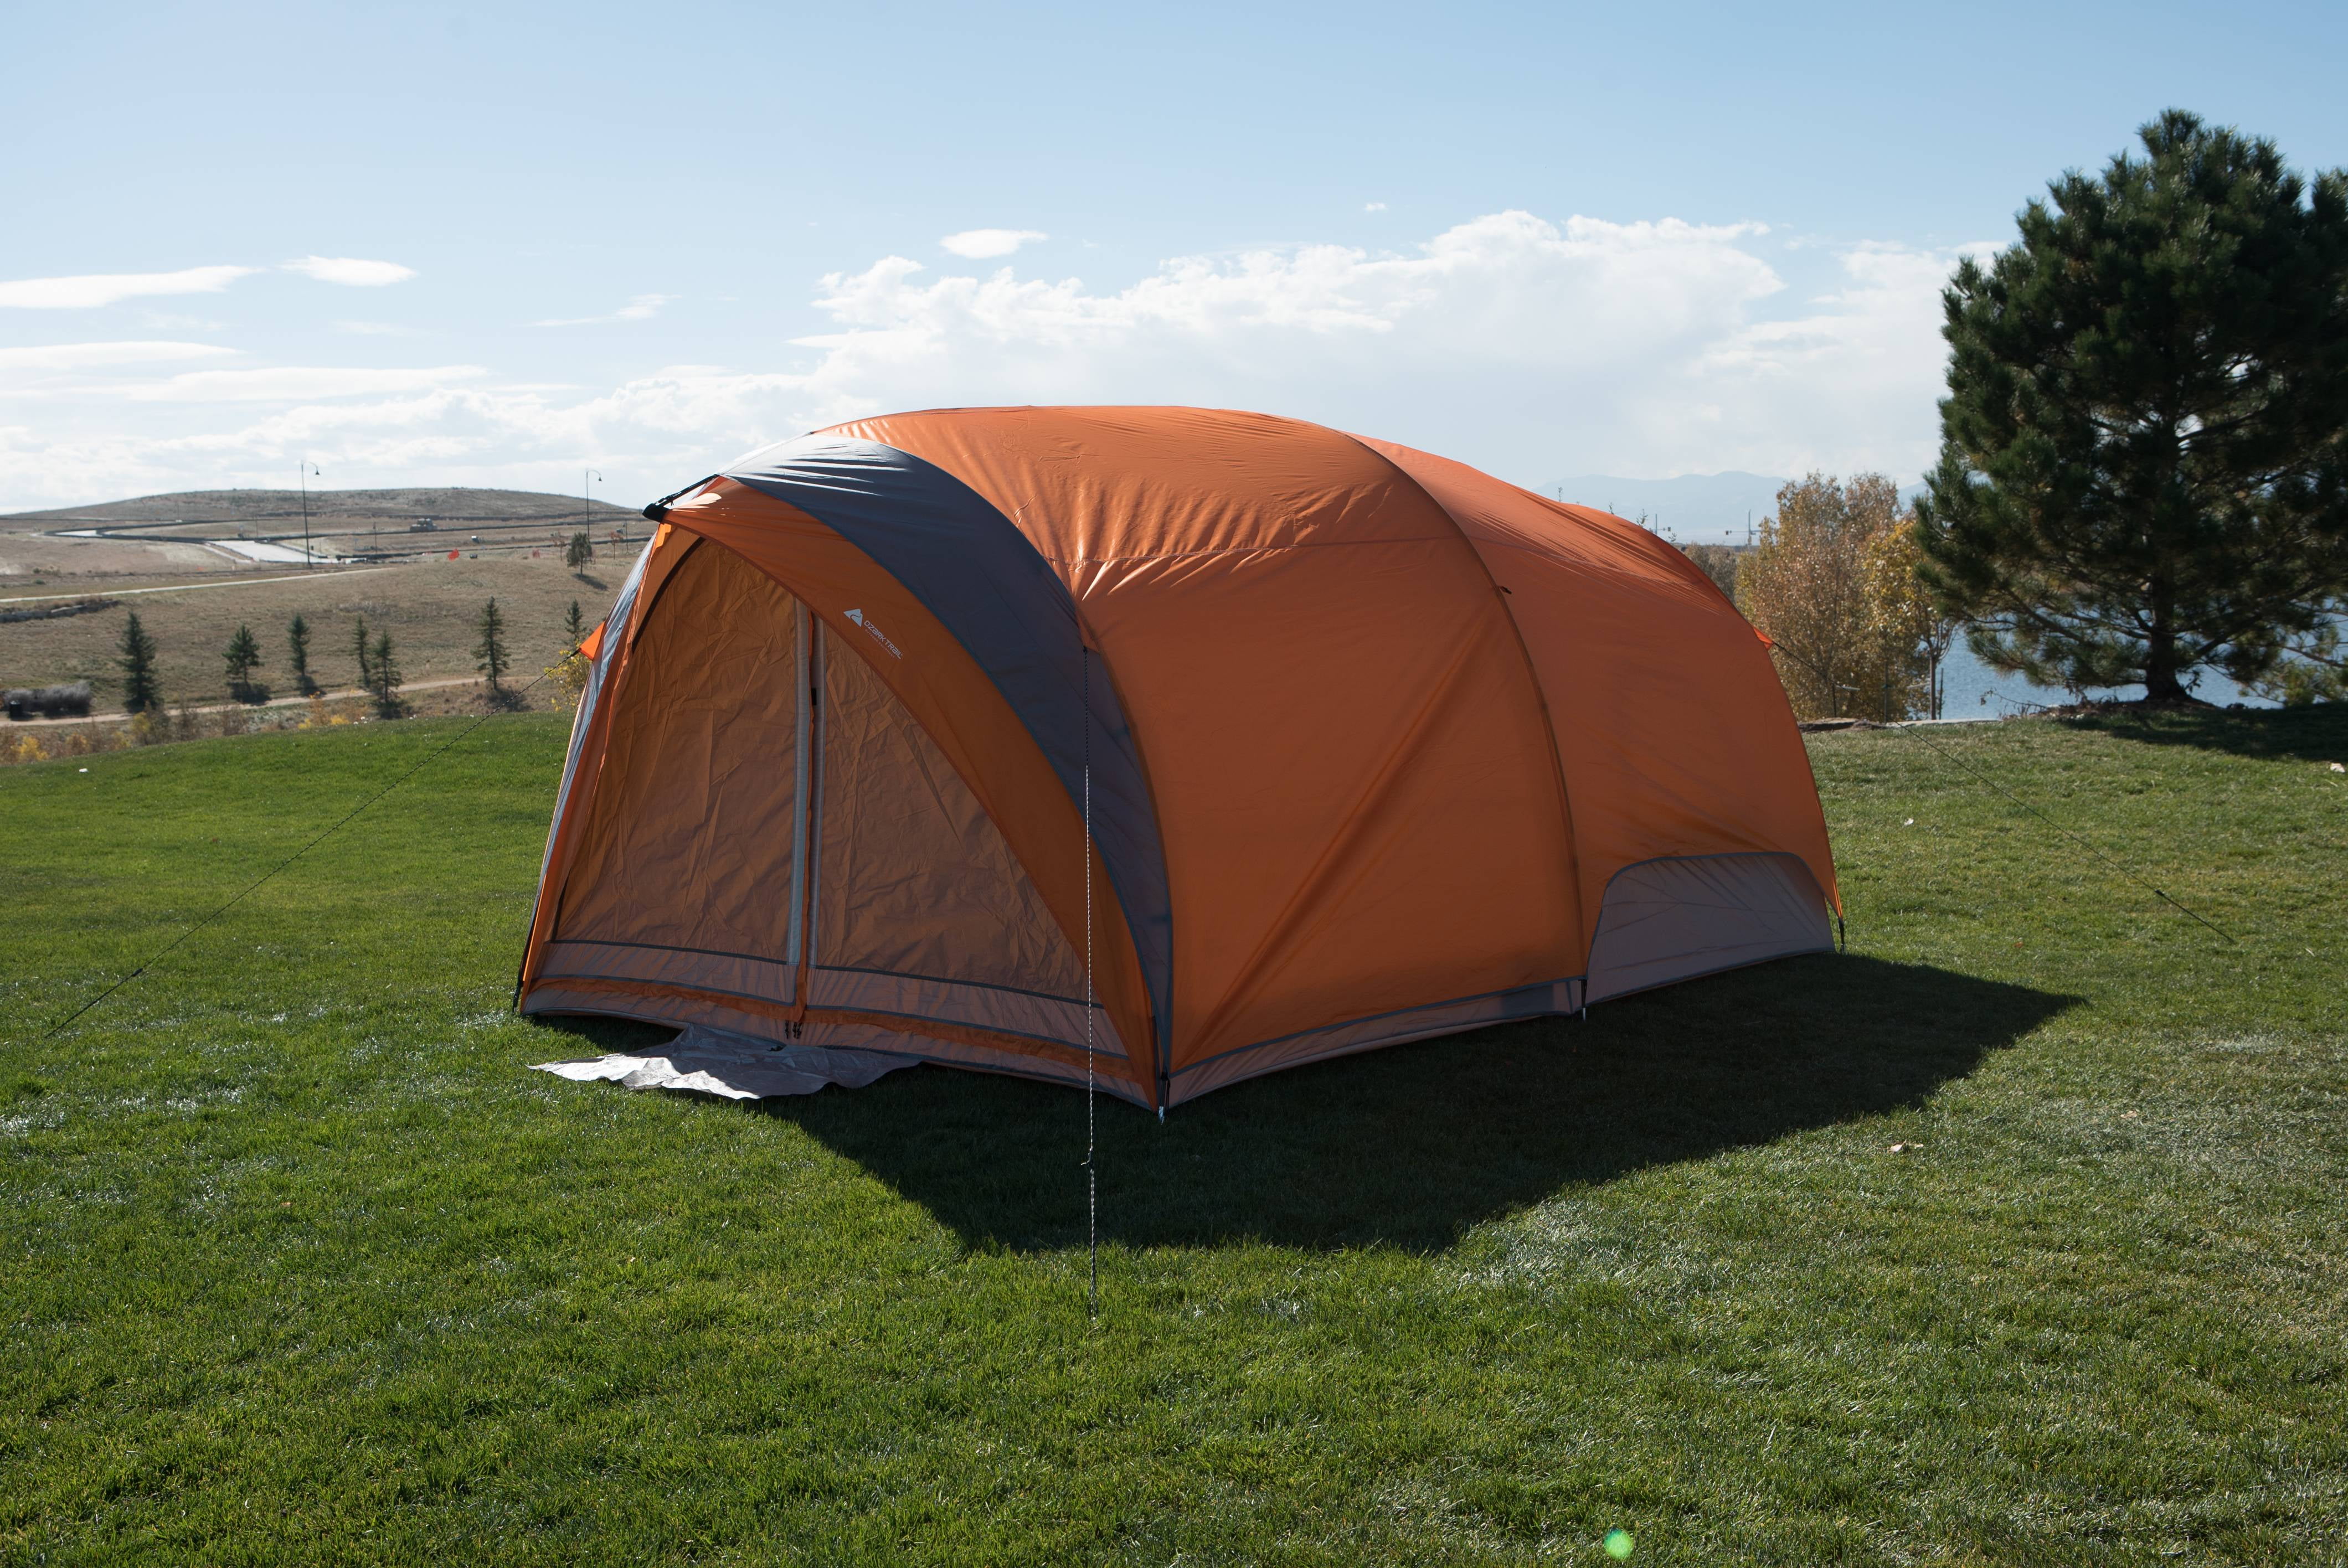 Ozark Trail 8-Person Dome Tunnel Tent, with Maximum Weather Protection 